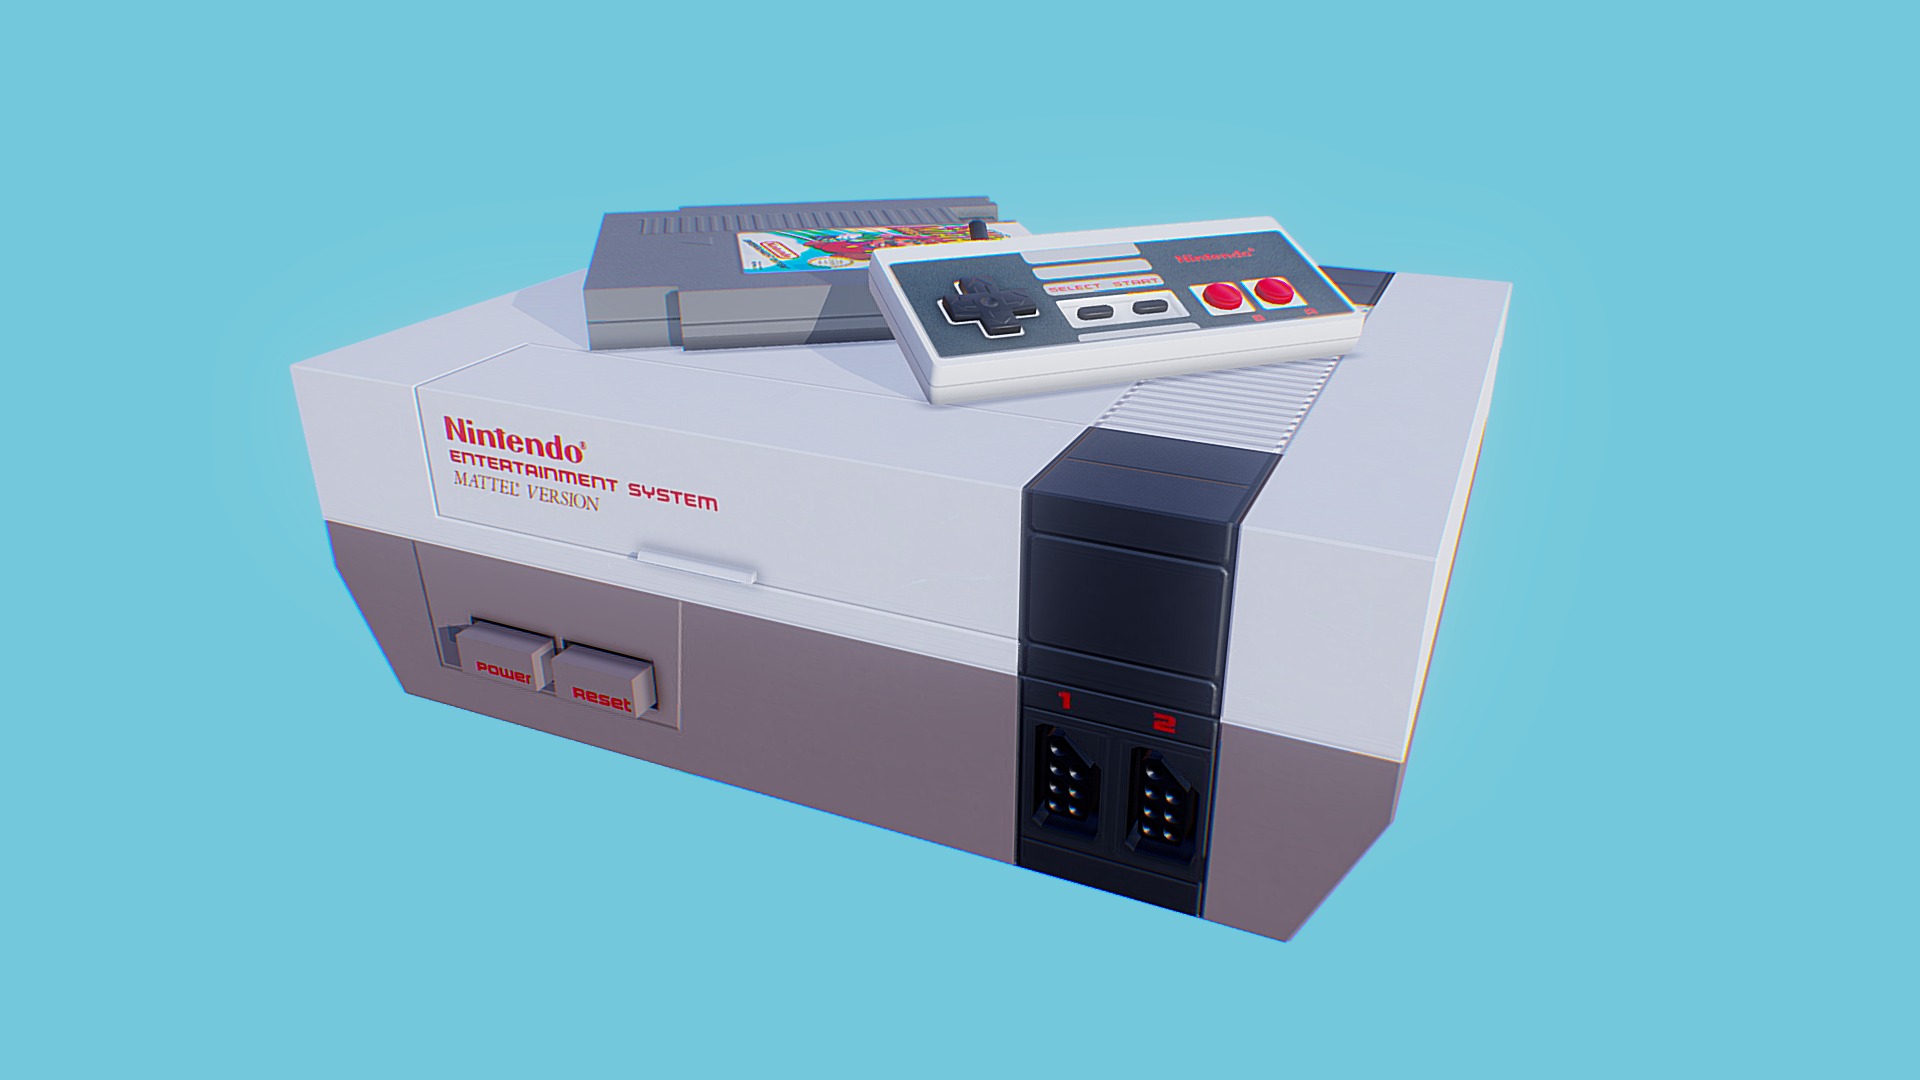 NES console, cartridge and controller all modelled in 3Ds Max and textured using Quixel Suite 3d model